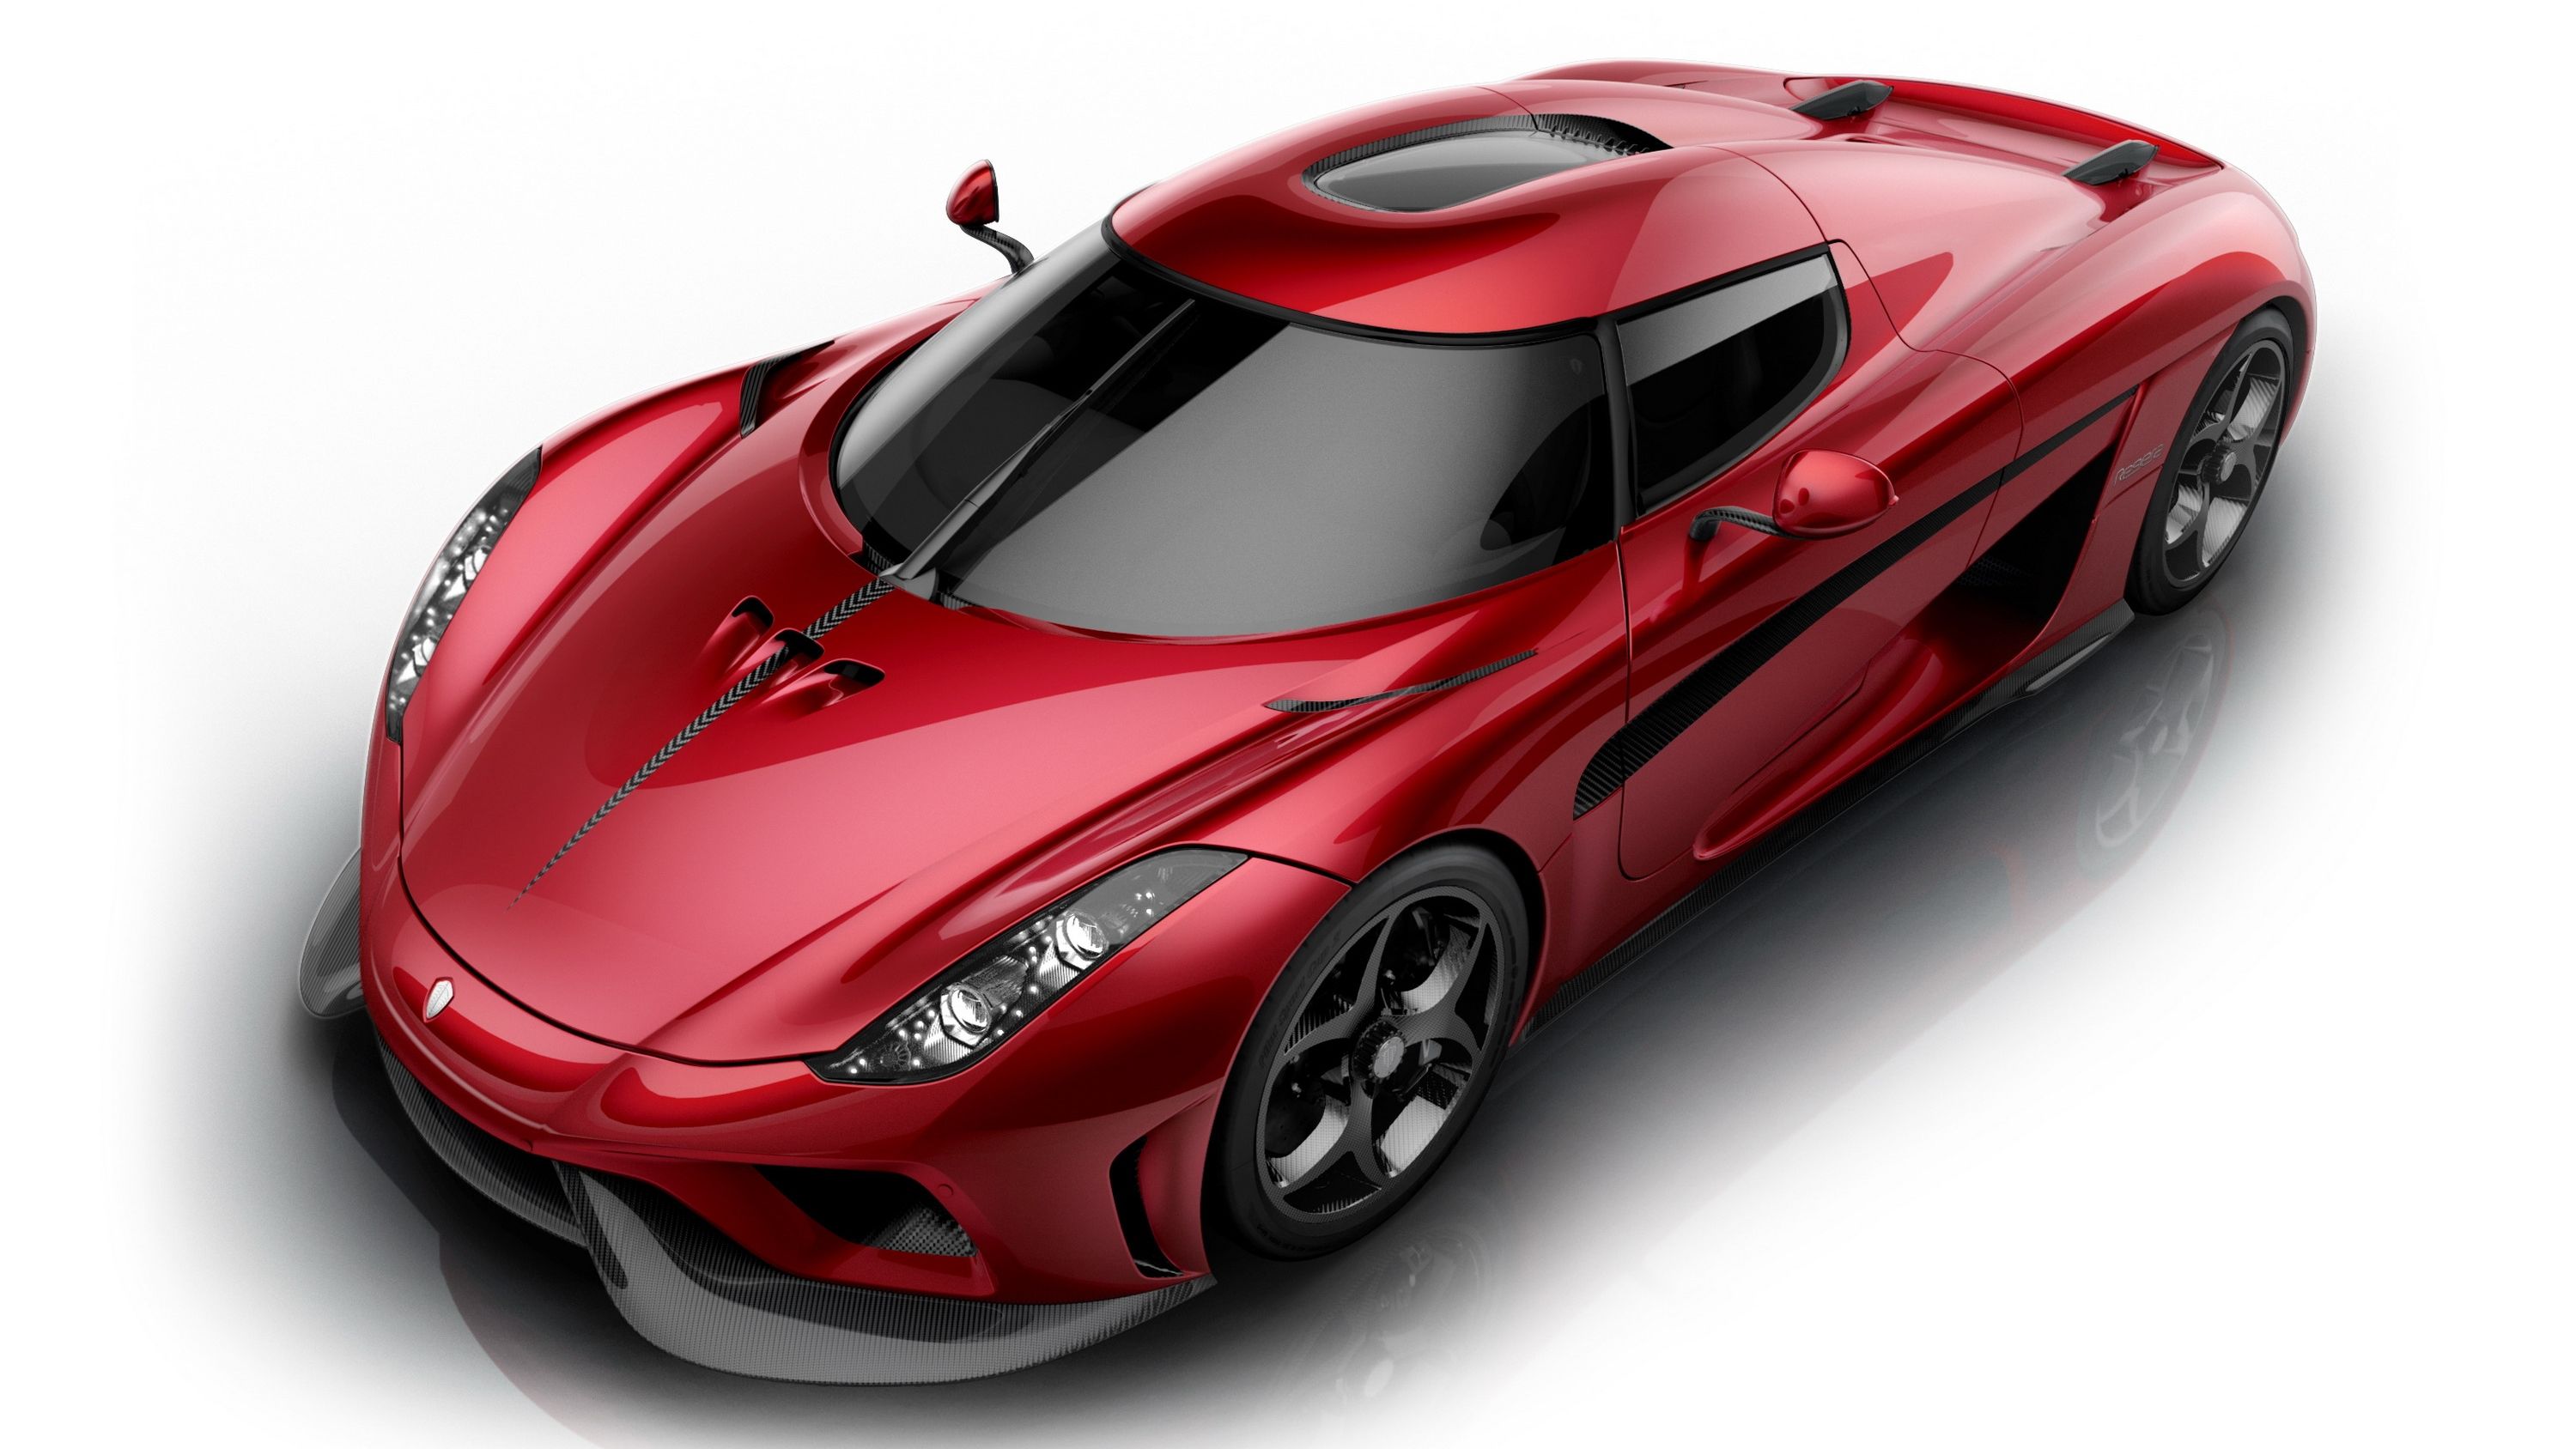 2017 Koenigsegg Wants to Shorten the Time it Takes to Deliver its Supercars